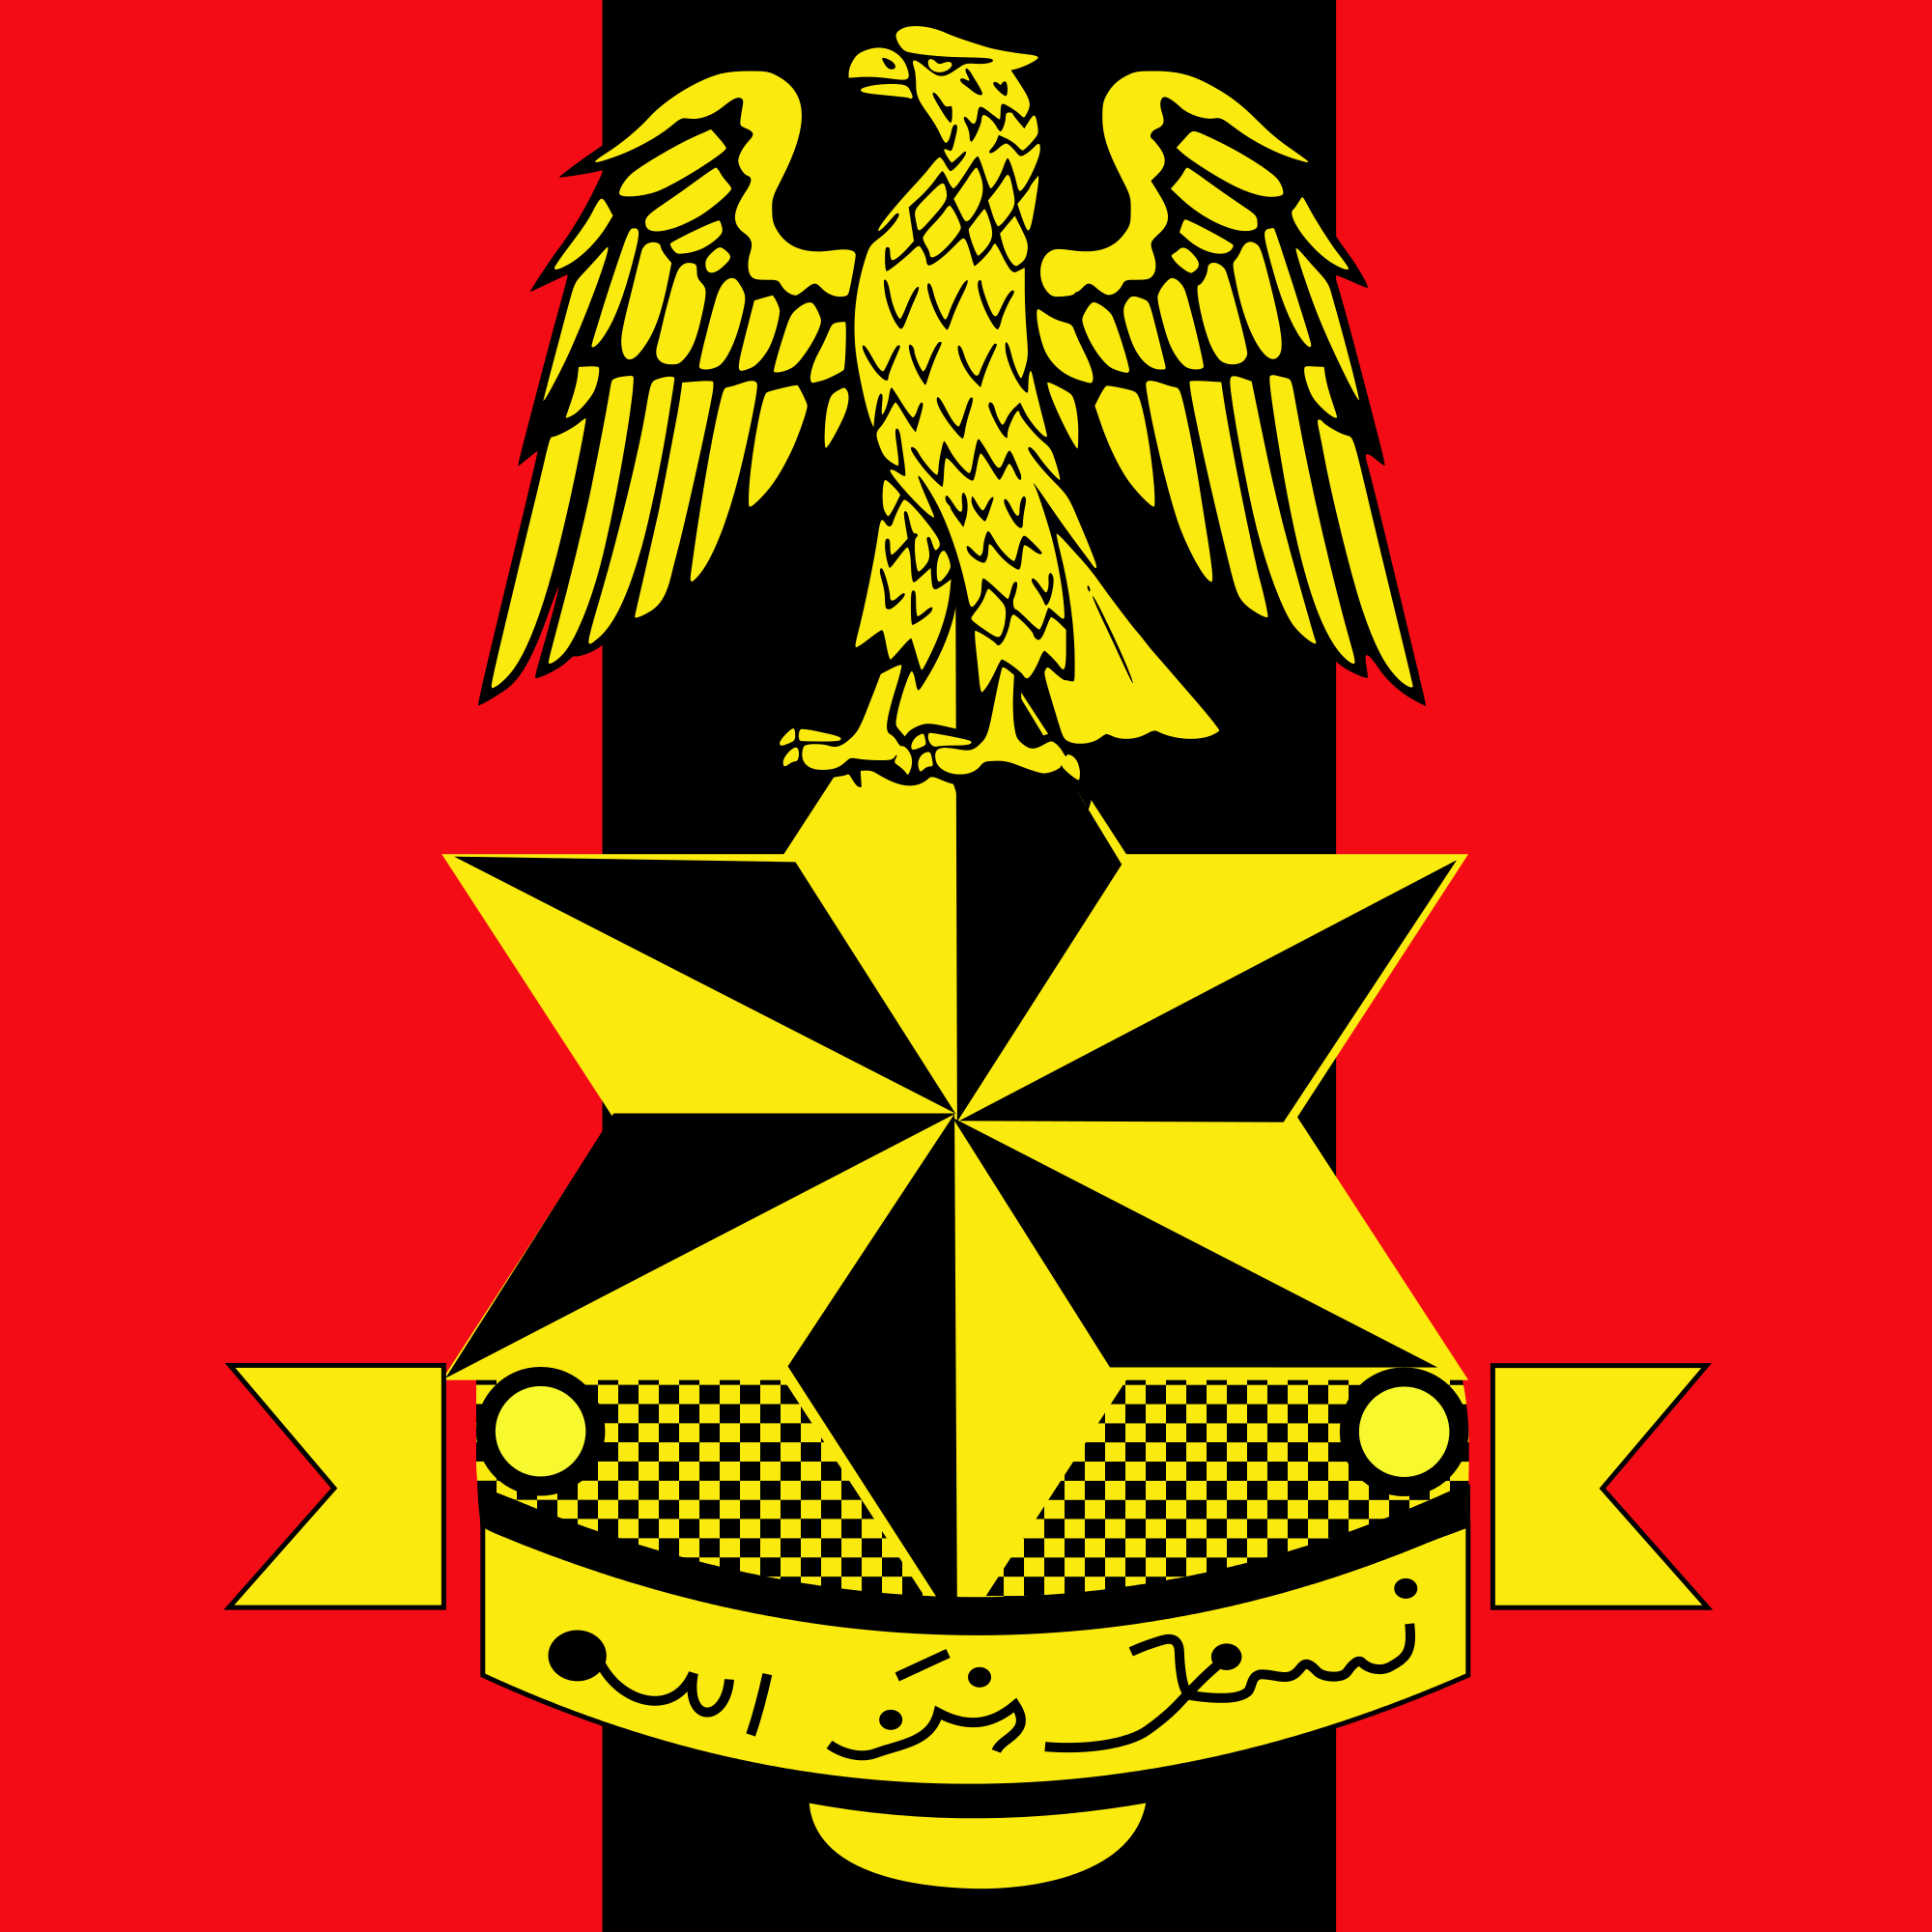 N500,000 Reward For Information On Suicide Bomber – Nigerian Army